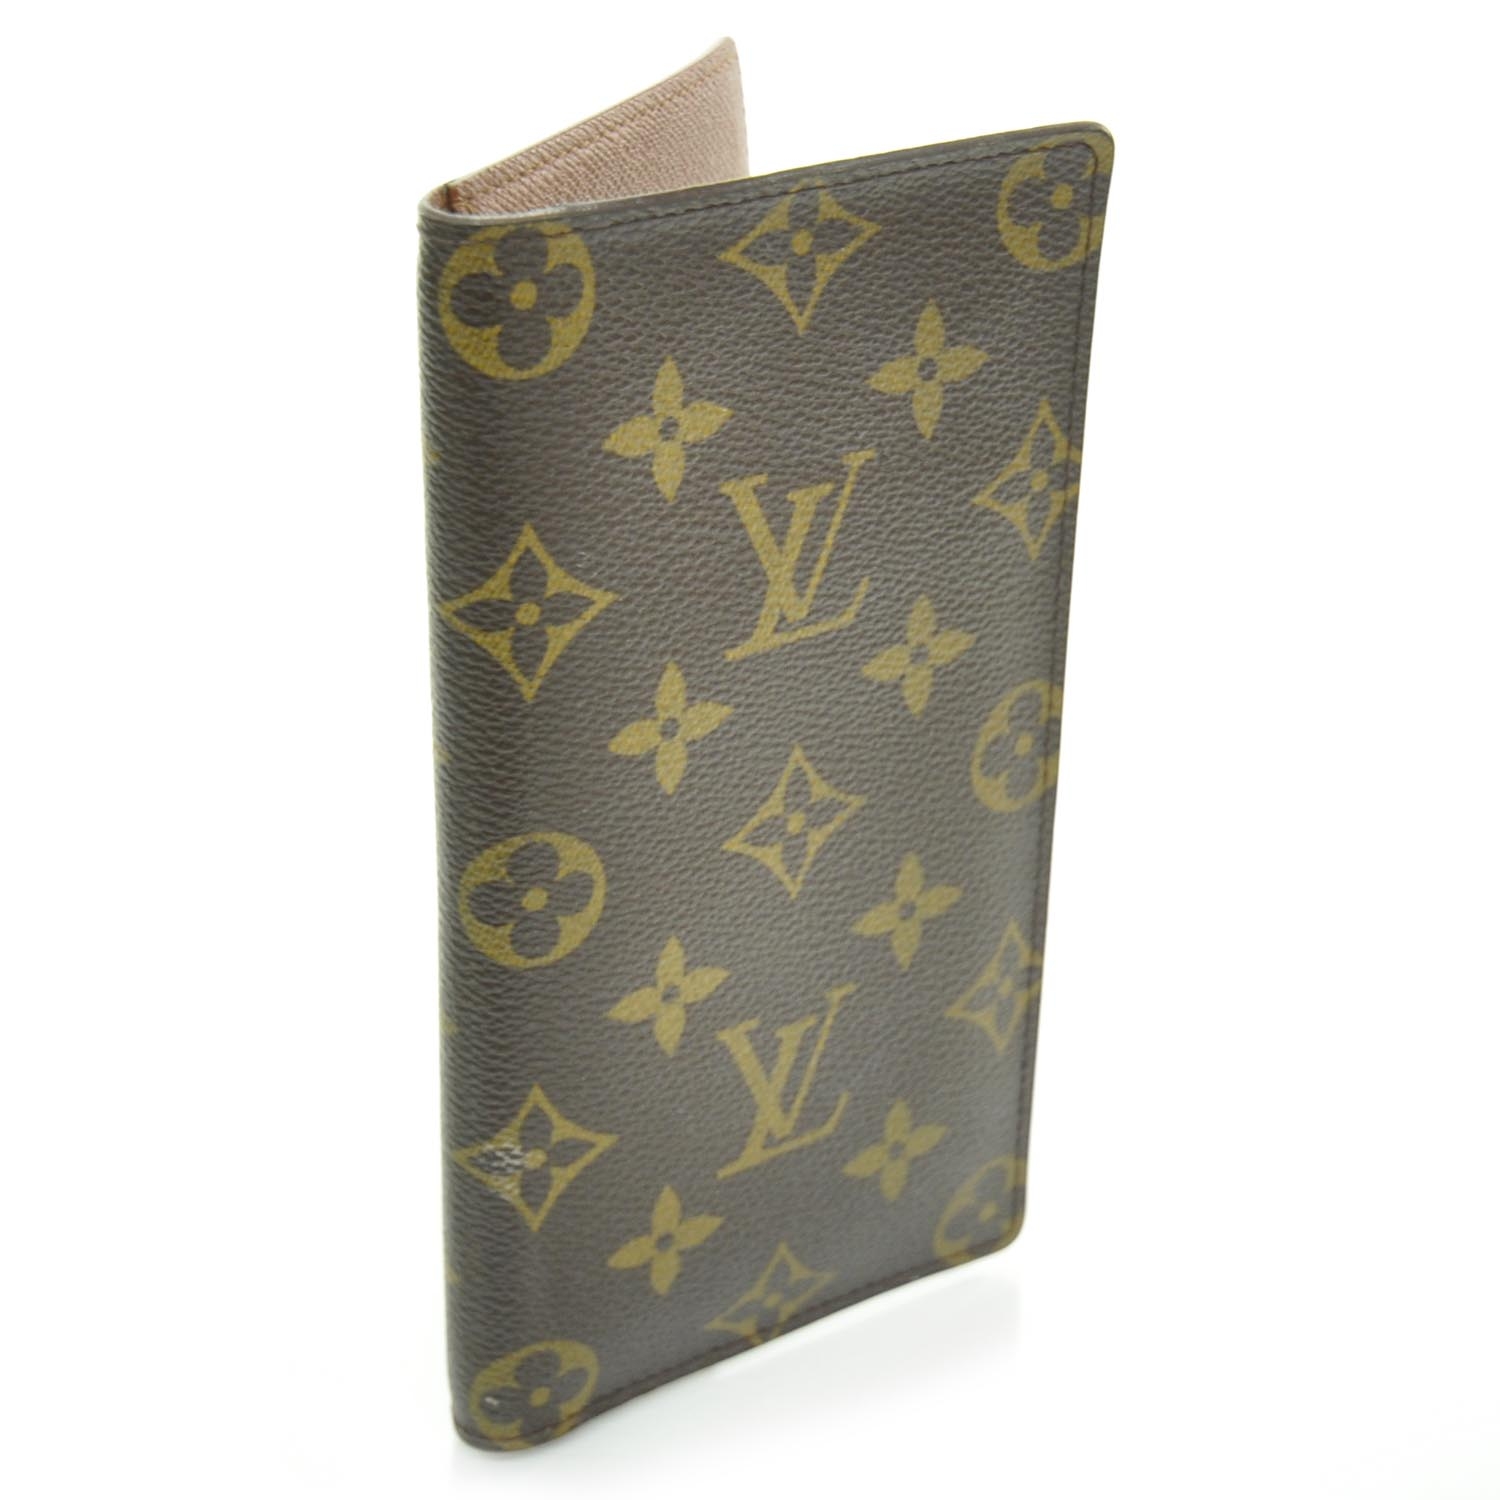 Lv Wallets   Natural Resource Department